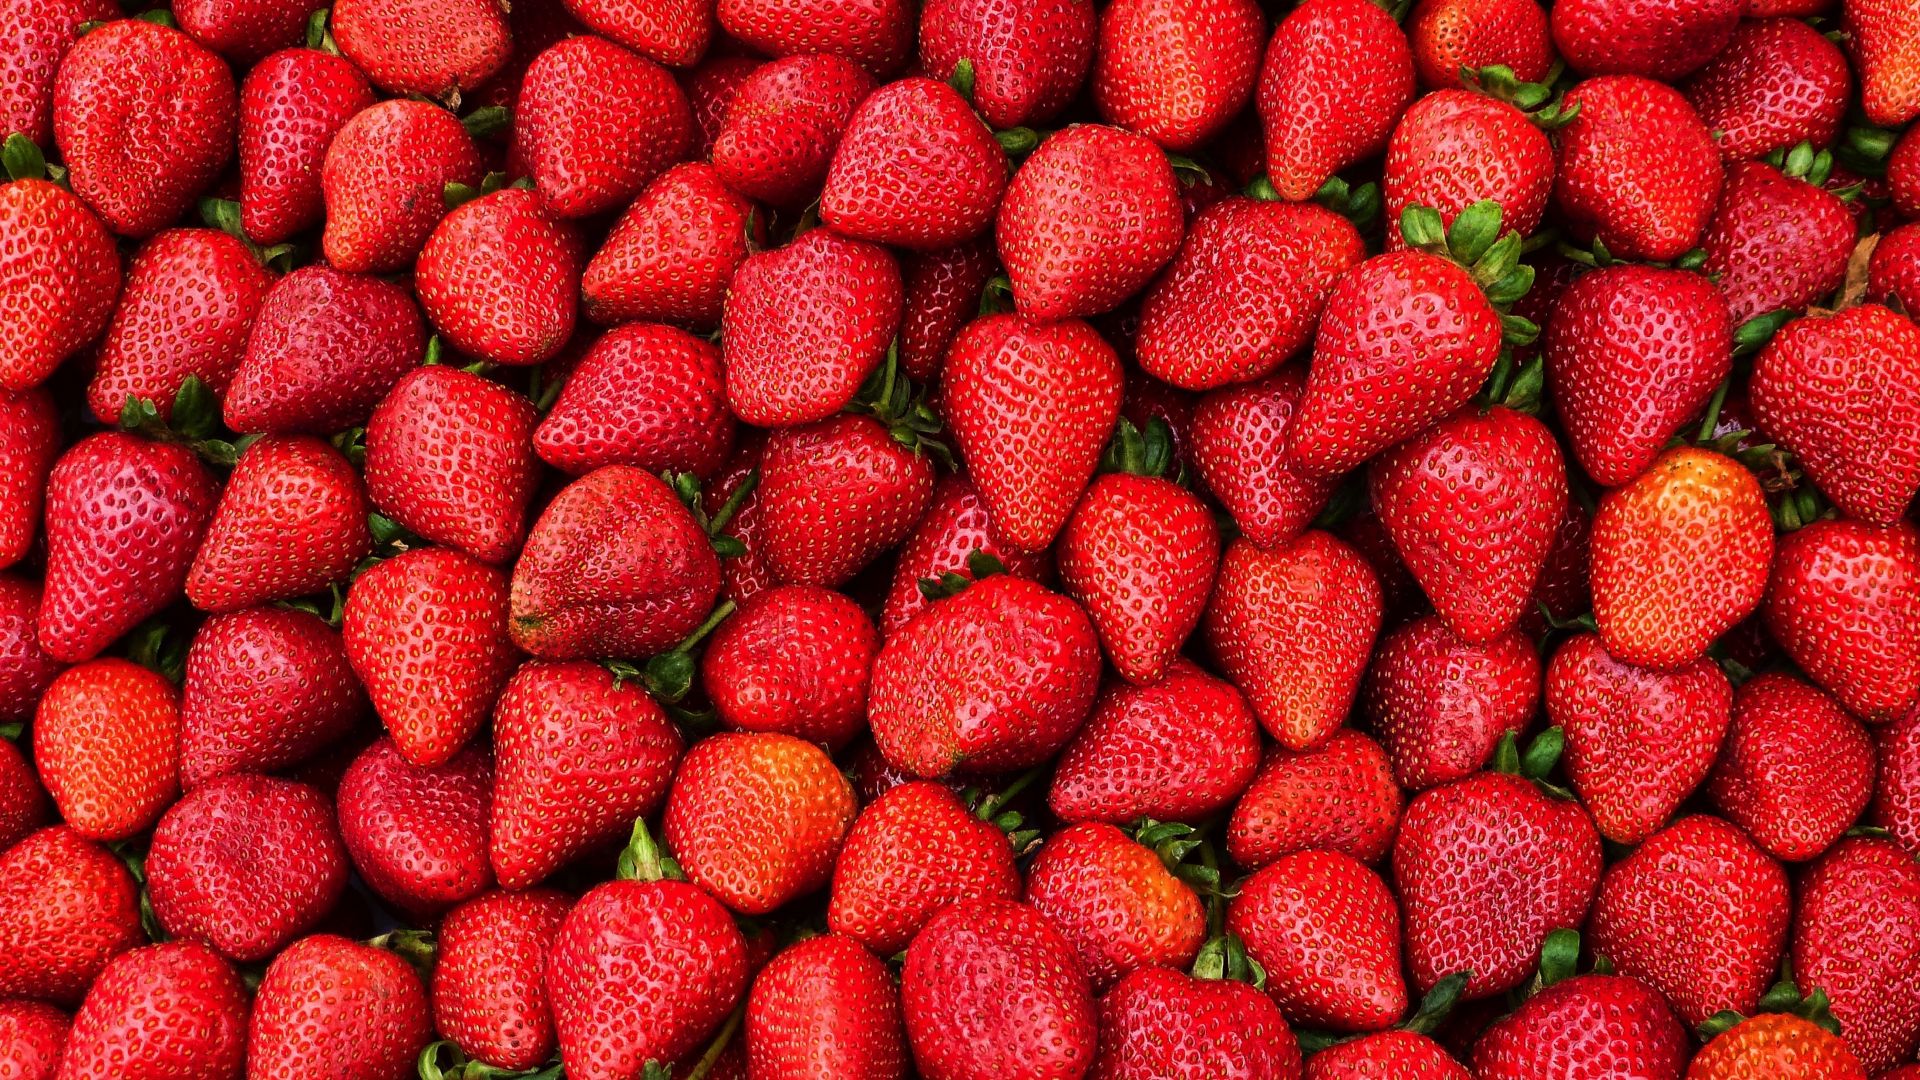 Desktop Wallpaper Strawberries, Red Fruits, Berries, Red, 4k, Hd Image,  Picture, Background, 774fdd